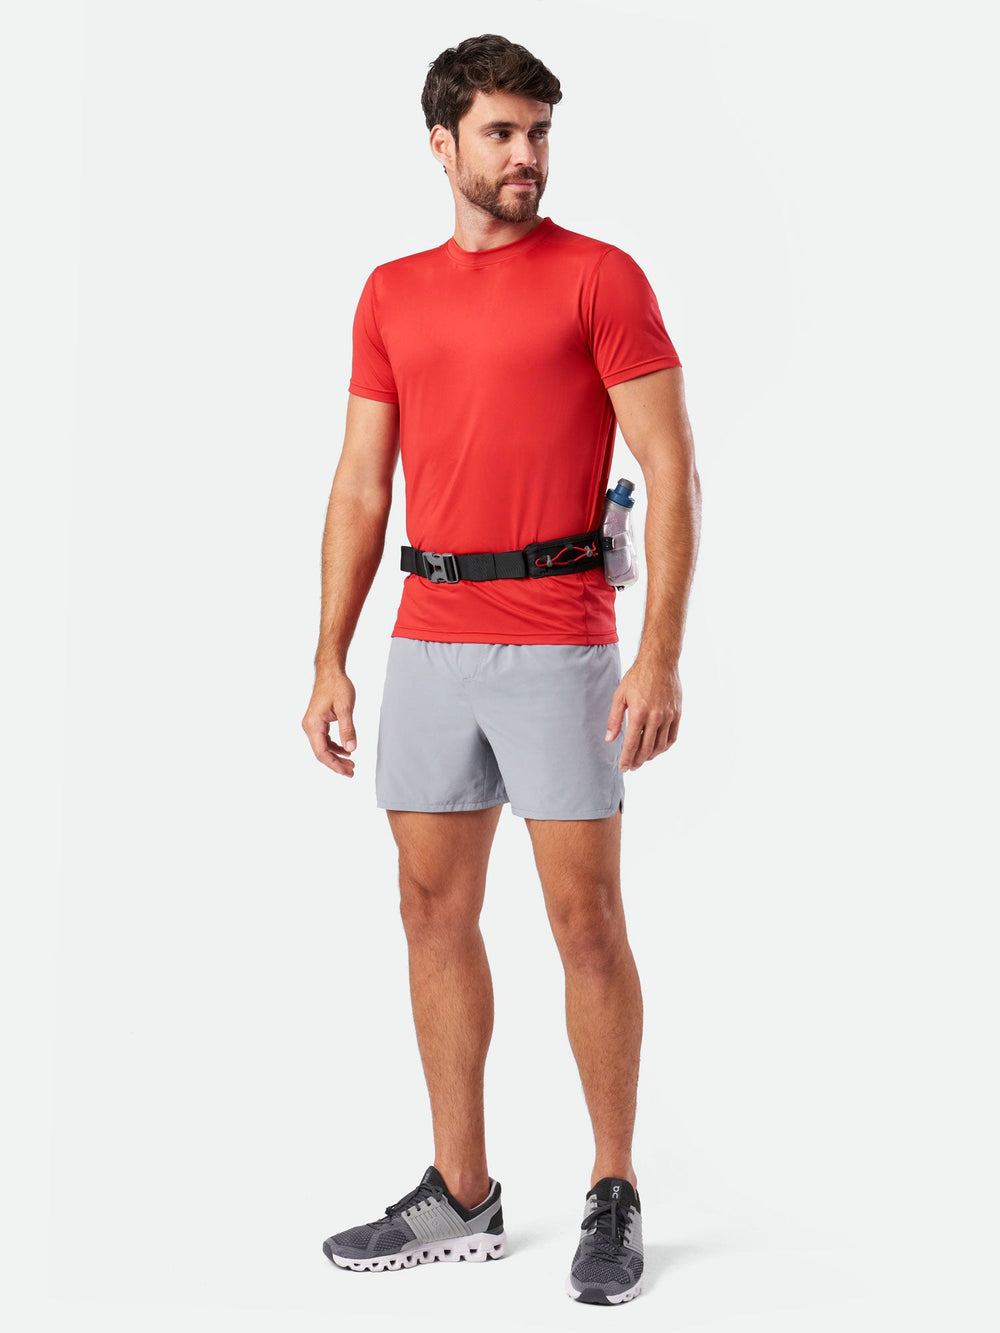 TrailMix Plus Insulated 3.0 Hydration Belt